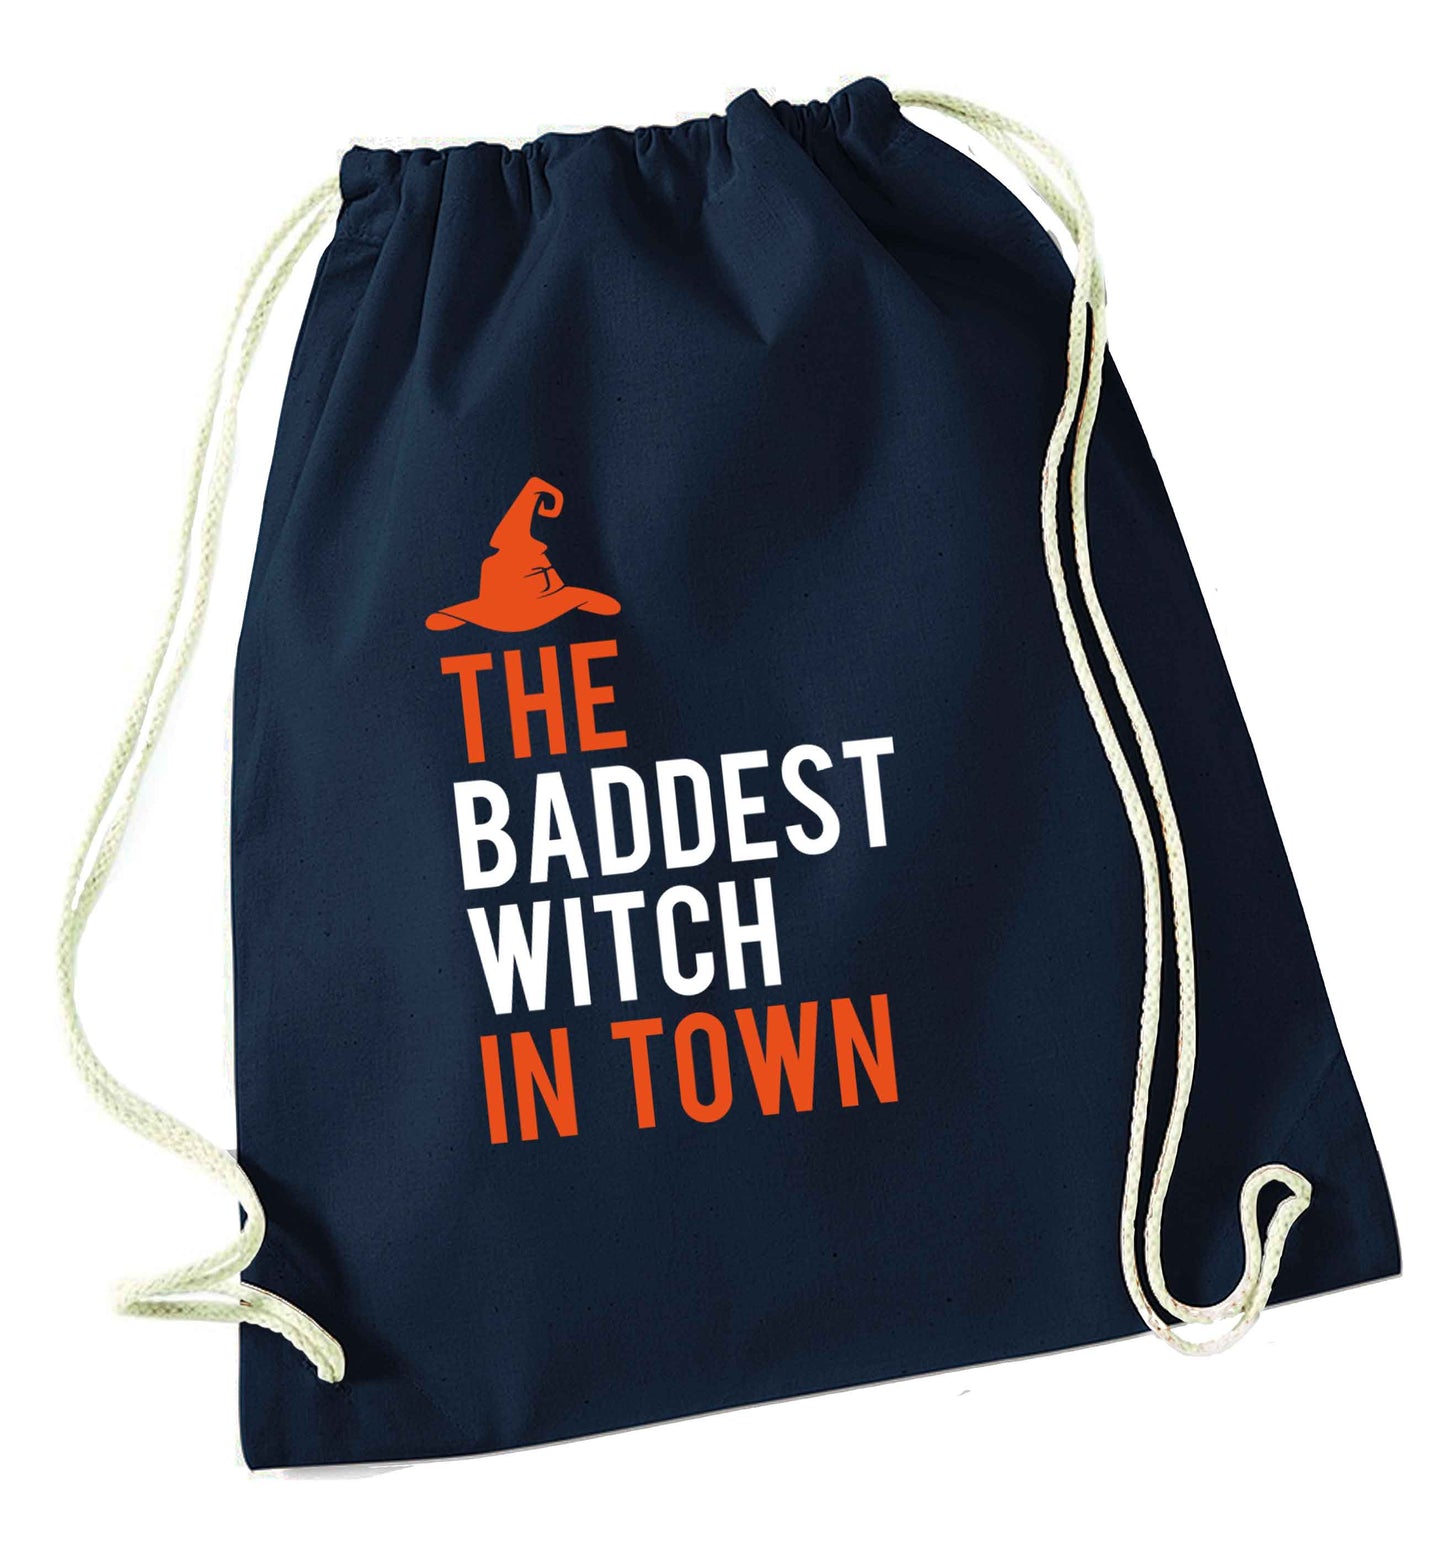 Badest witch in town navy drawstring bag